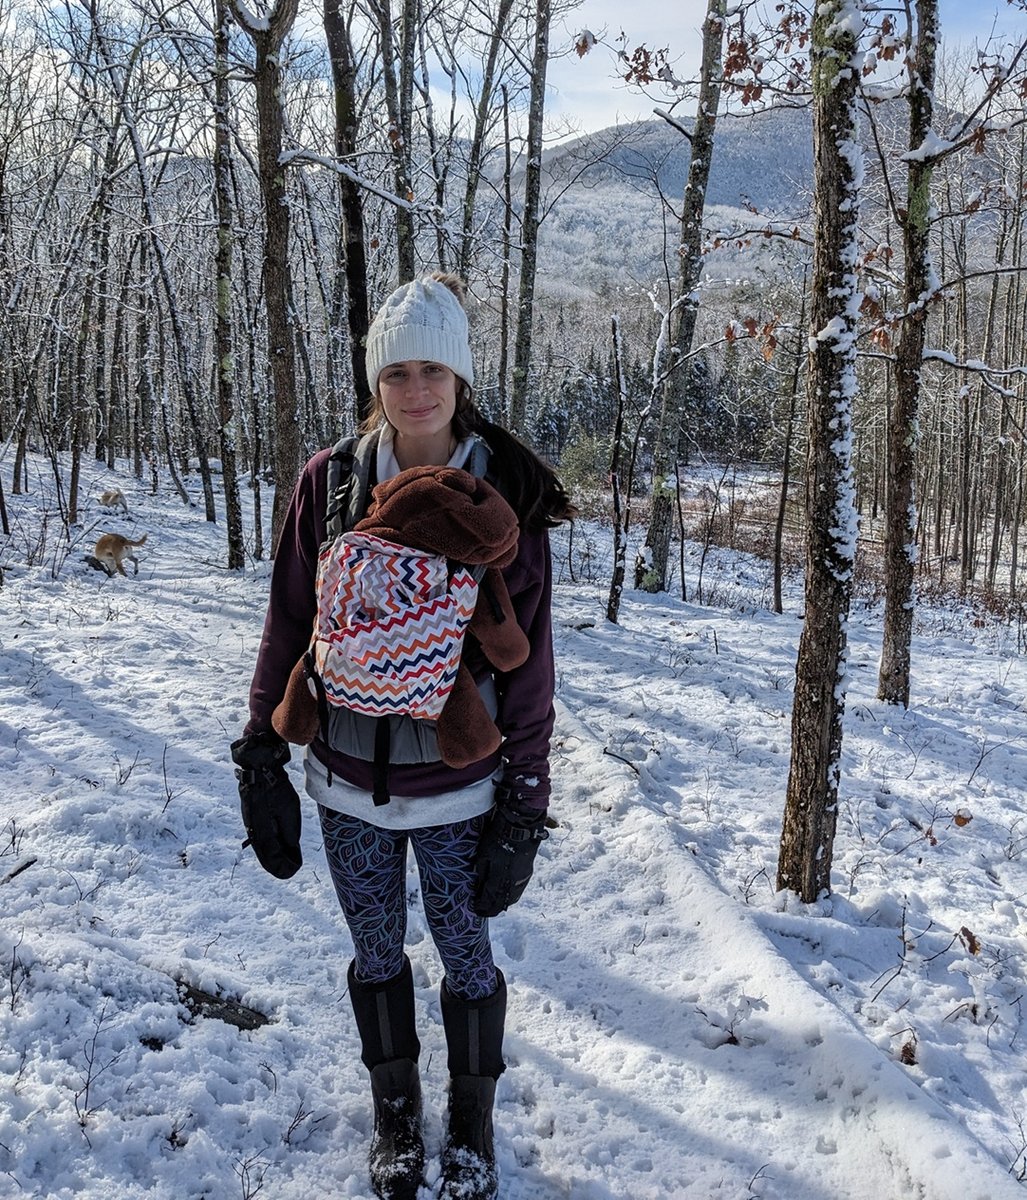 Dr. Ashten hiking with her son, Calix.